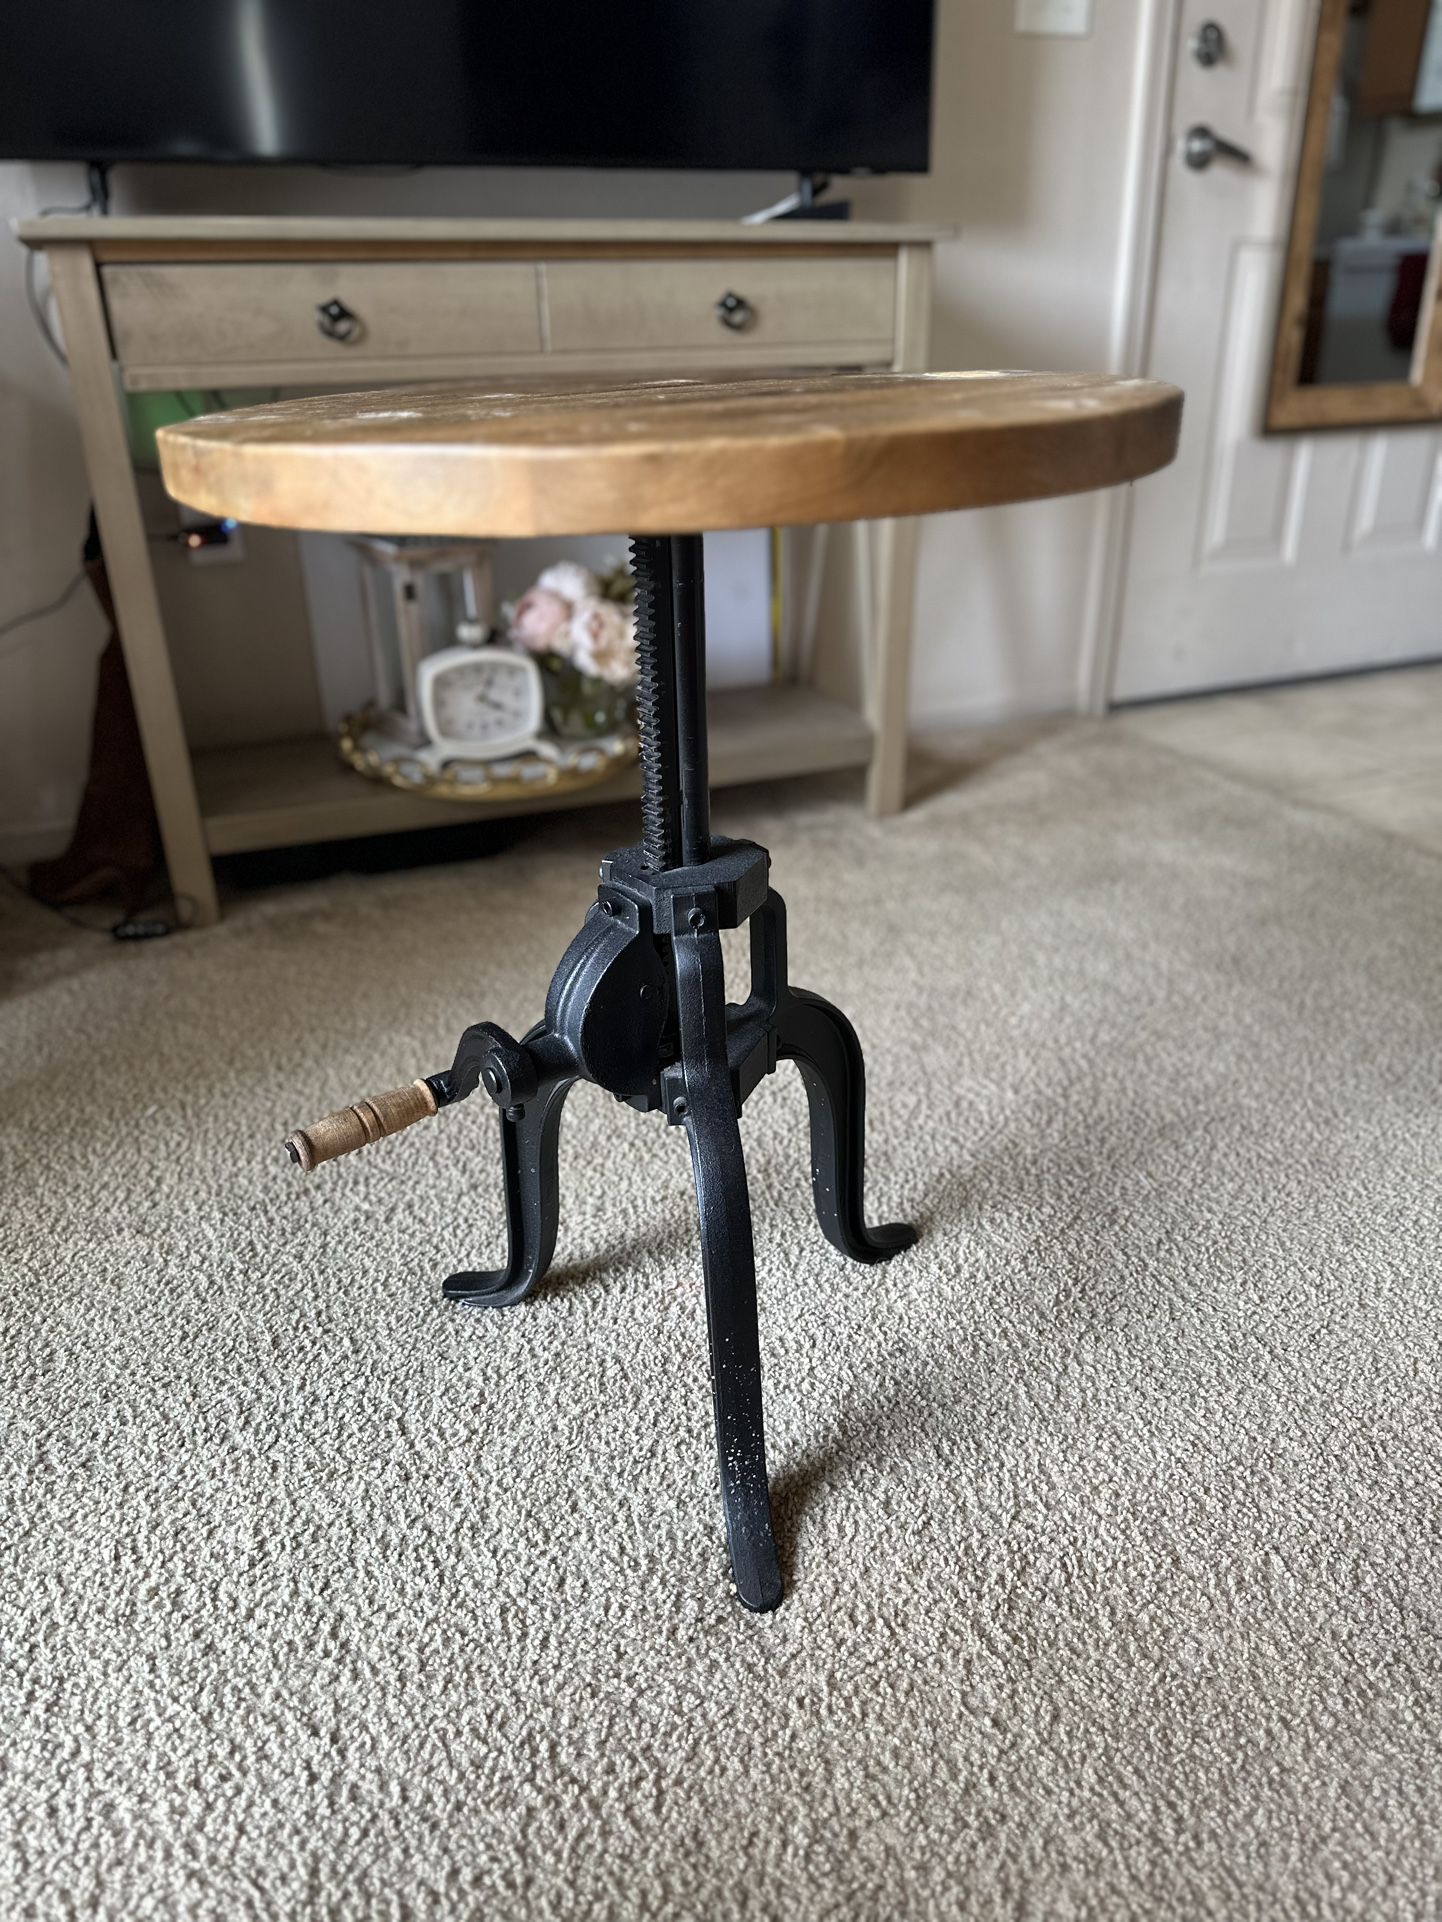 Rustic End Table